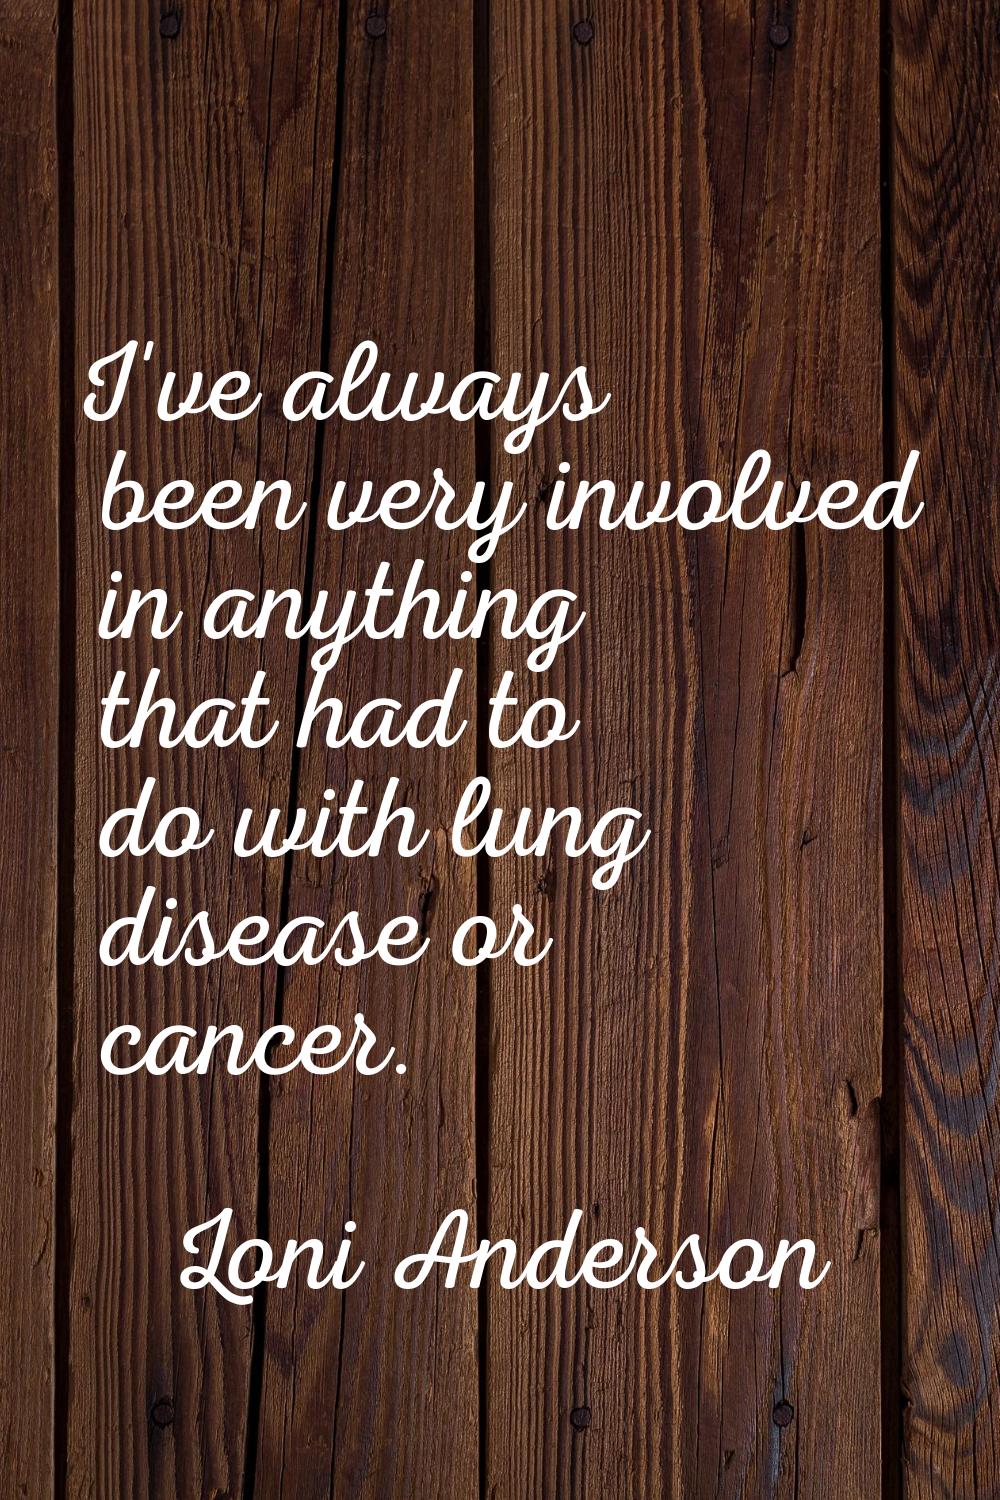 I've always been very involved in anything that had to do with lung disease or cancer.